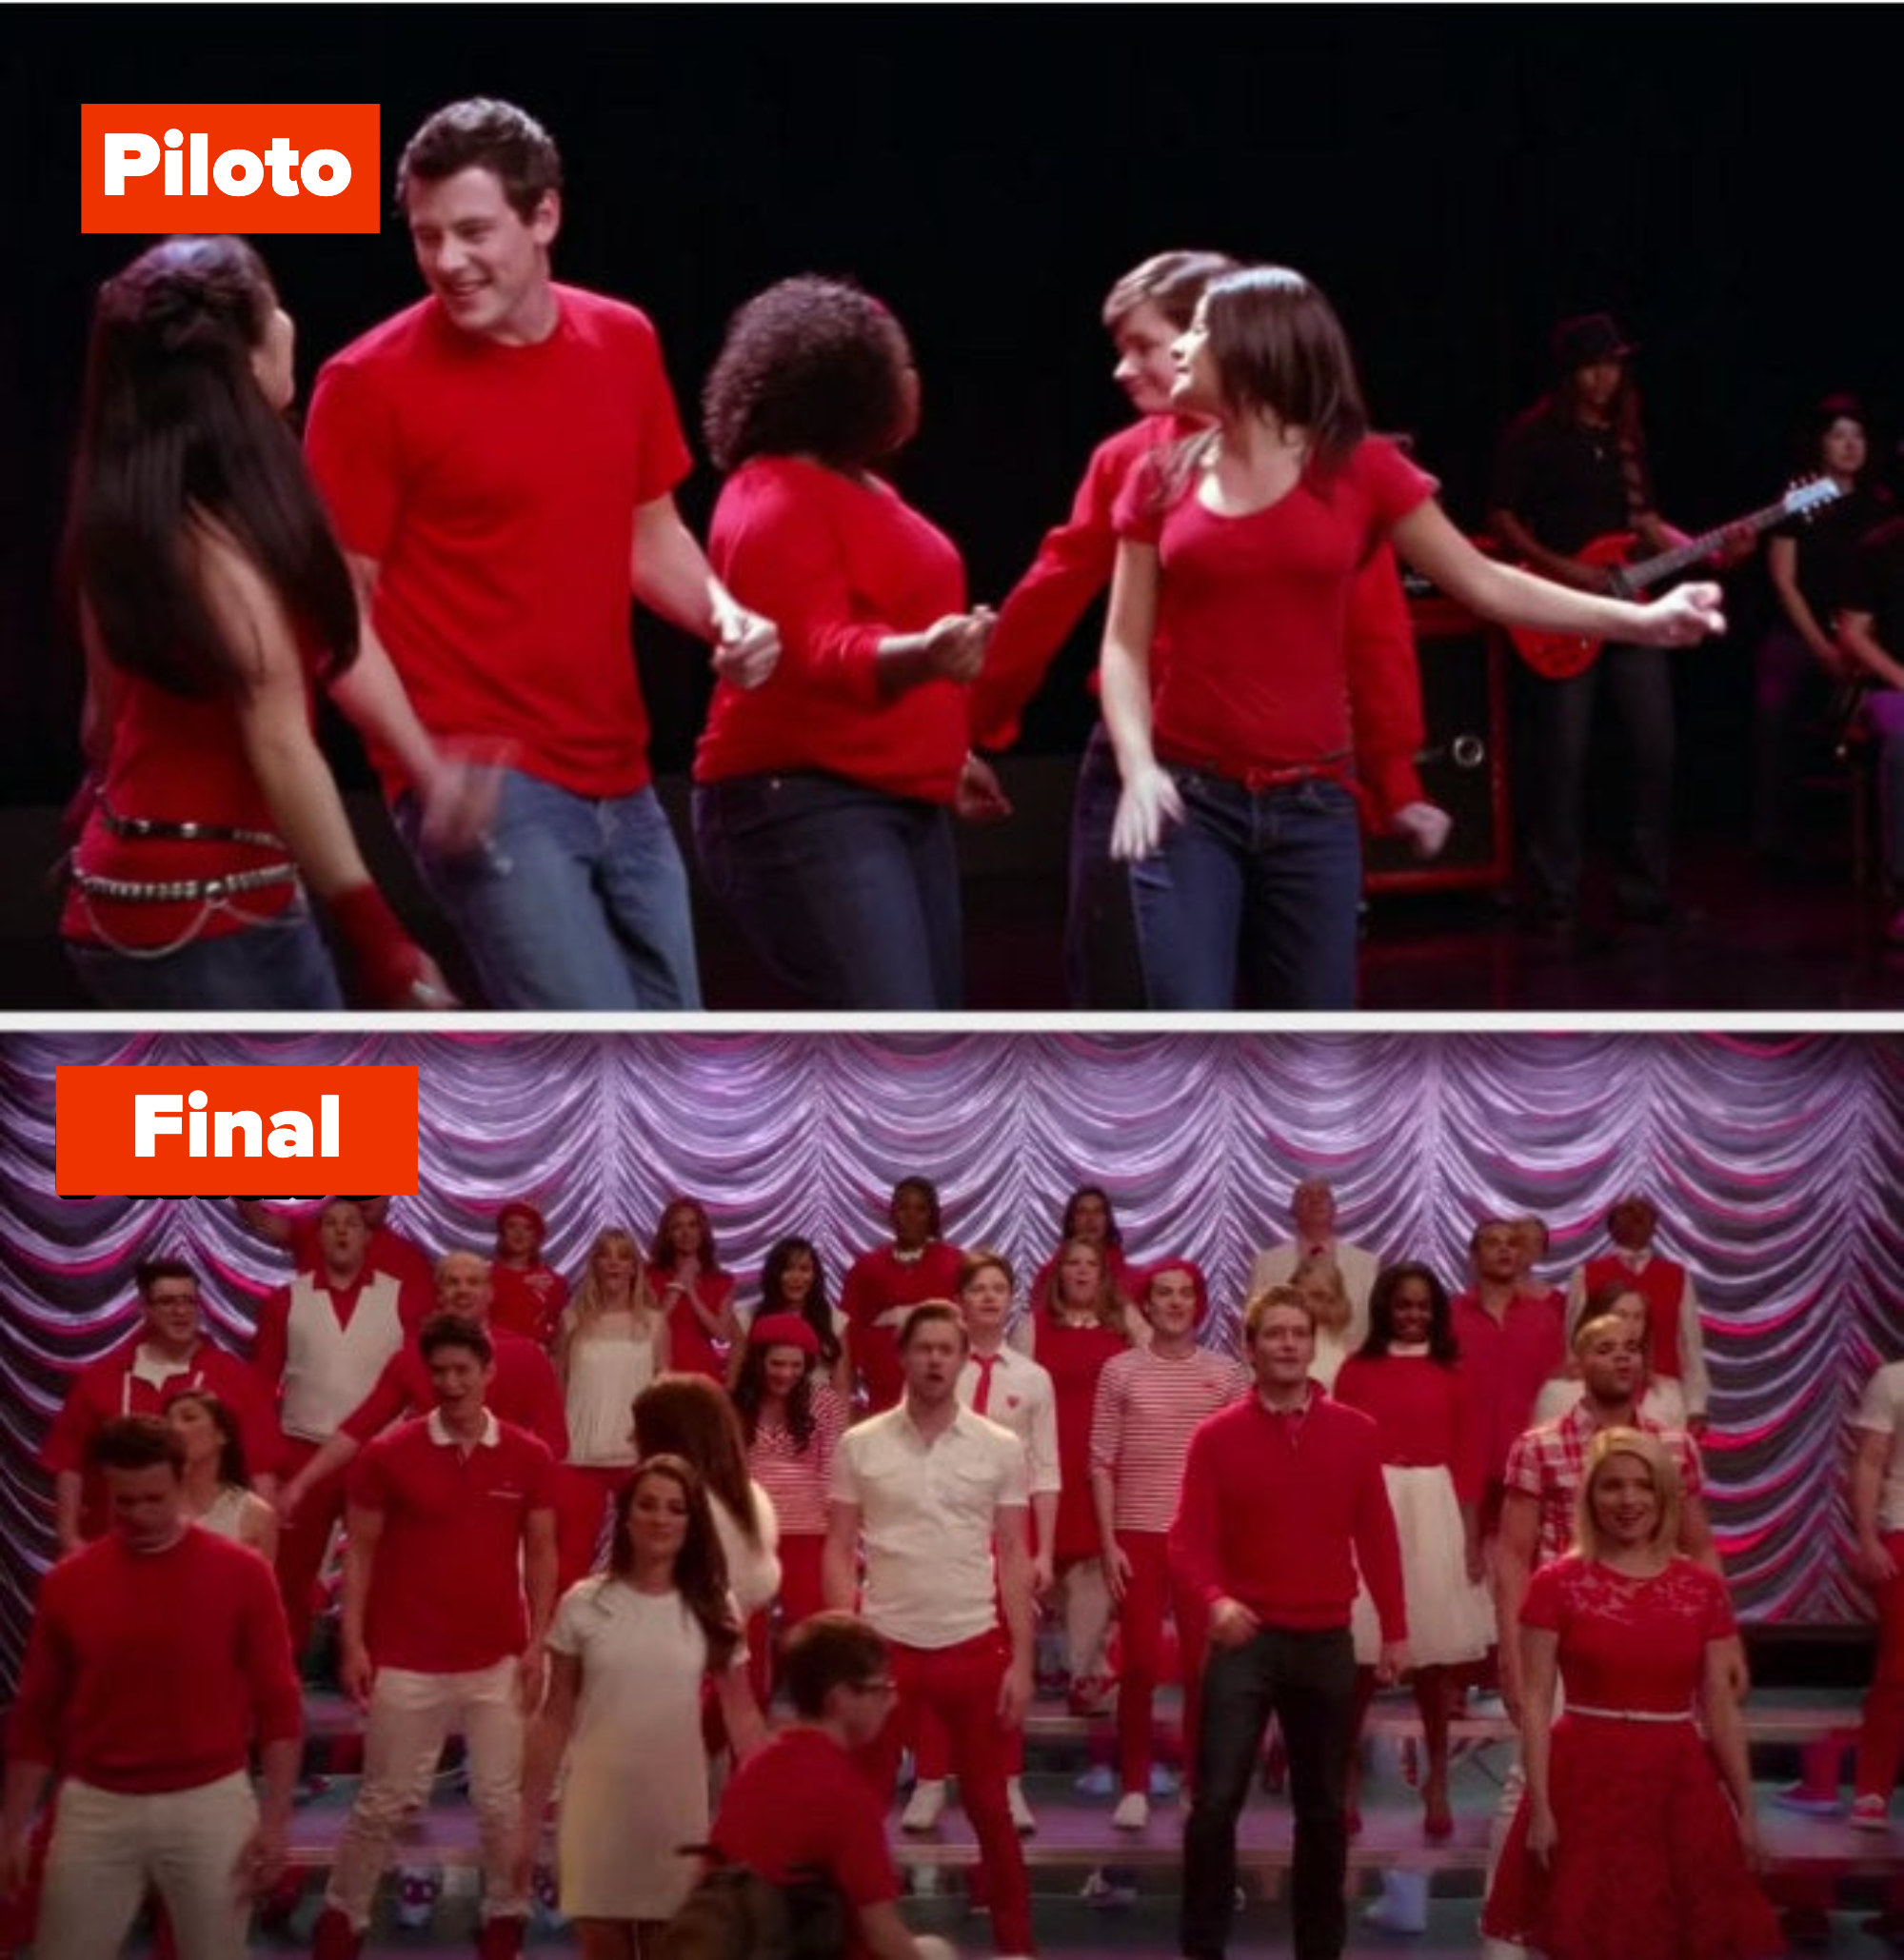 The New Directions wearing red in their first and last performances on the show